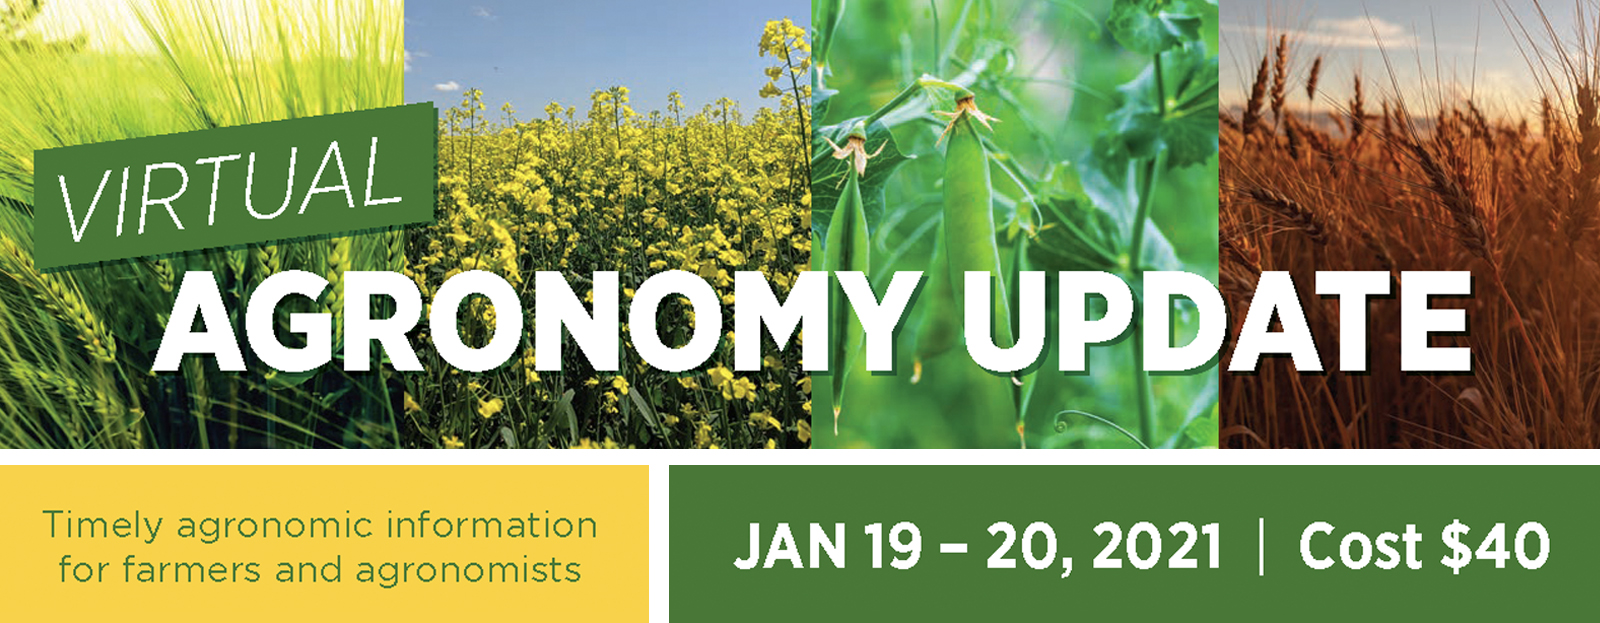 Agronomy Update 2021 Virtual Edition